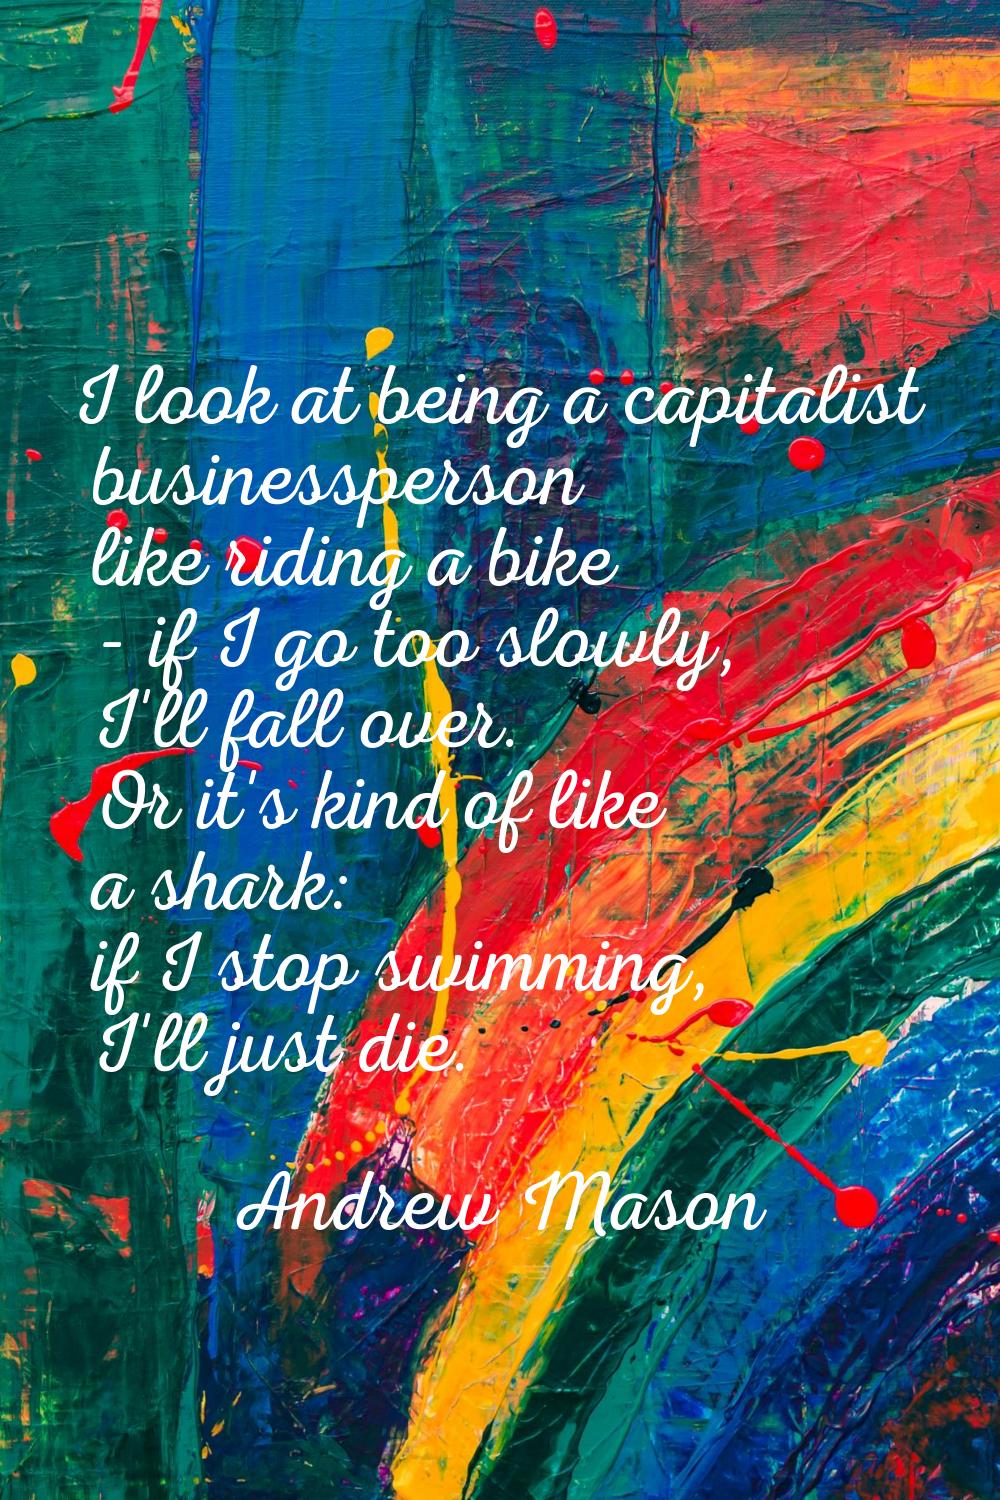 I look at being a capitalist businessperson like riding a bike - if I go too slowly, I'll fall over